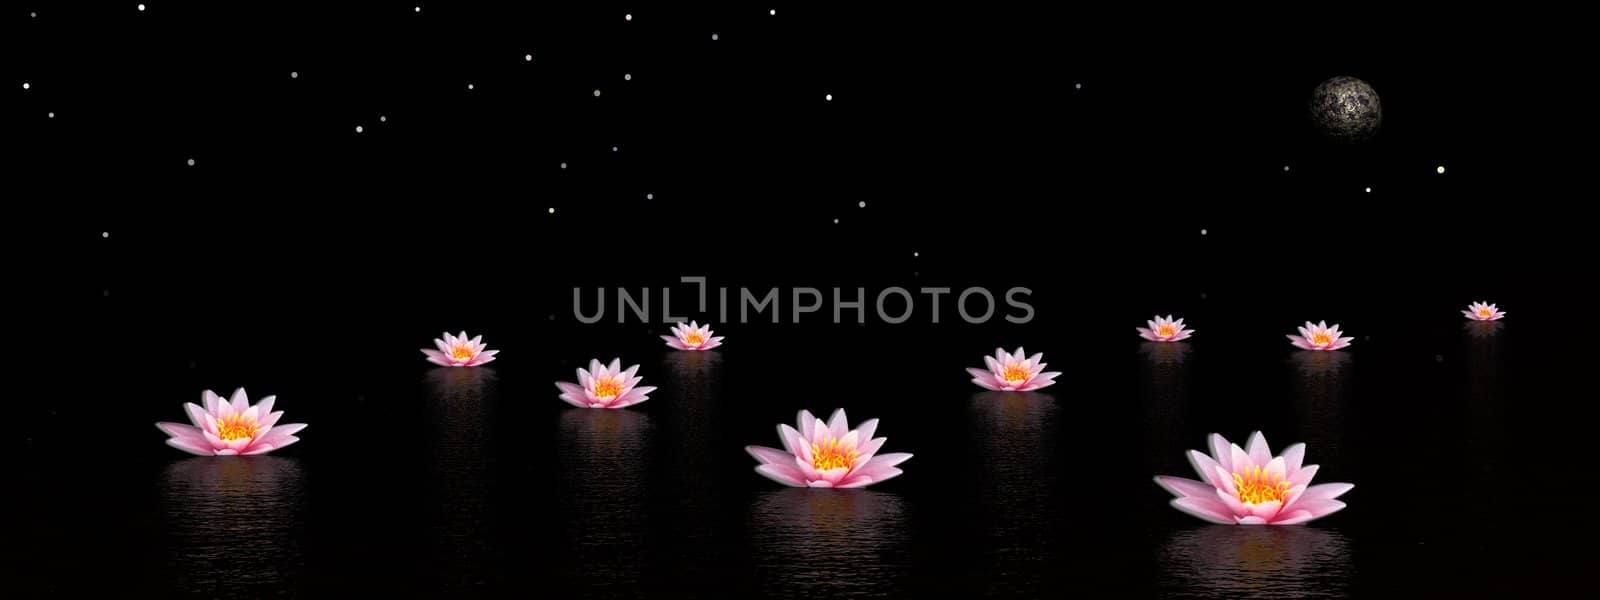 Several pink lily flowers in the water by night with moon and stars